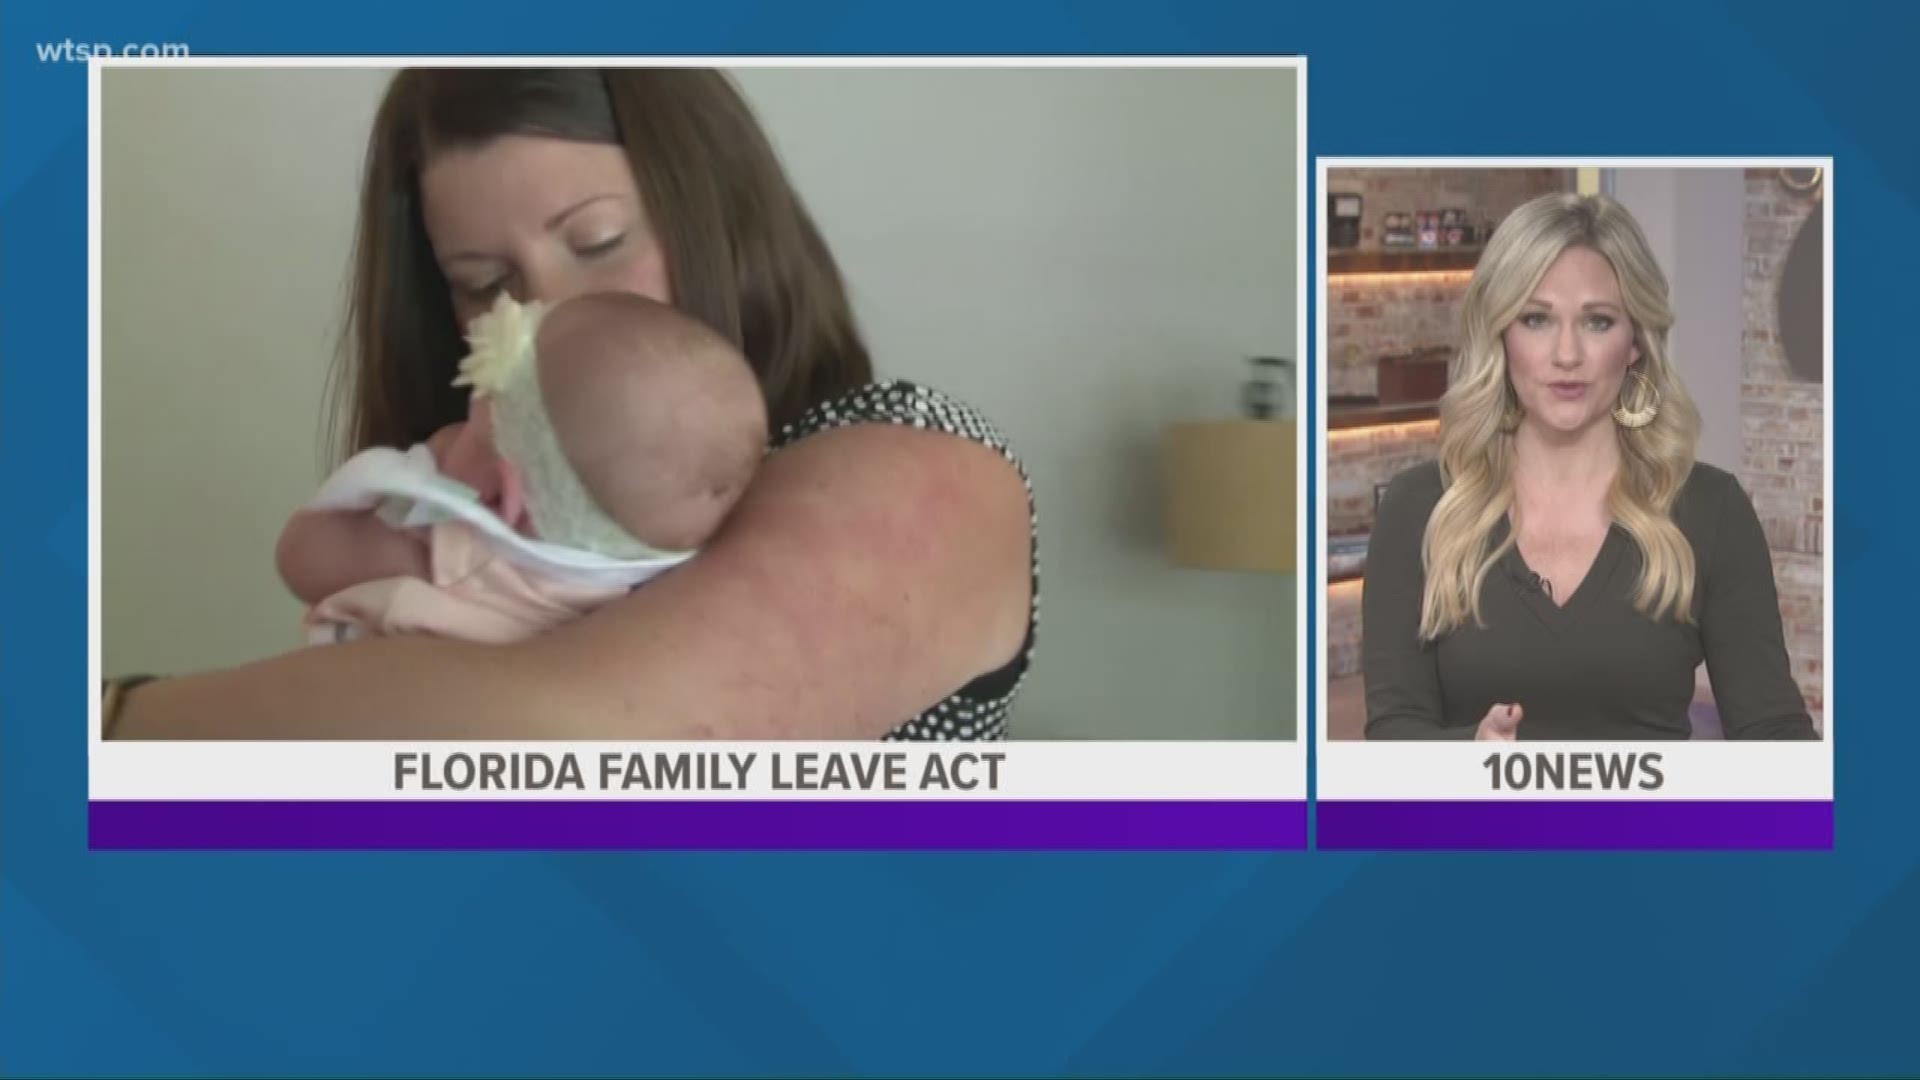 Called the "Florida Family Leave Act," it would apply to employees who have been employed for at least 18 months.